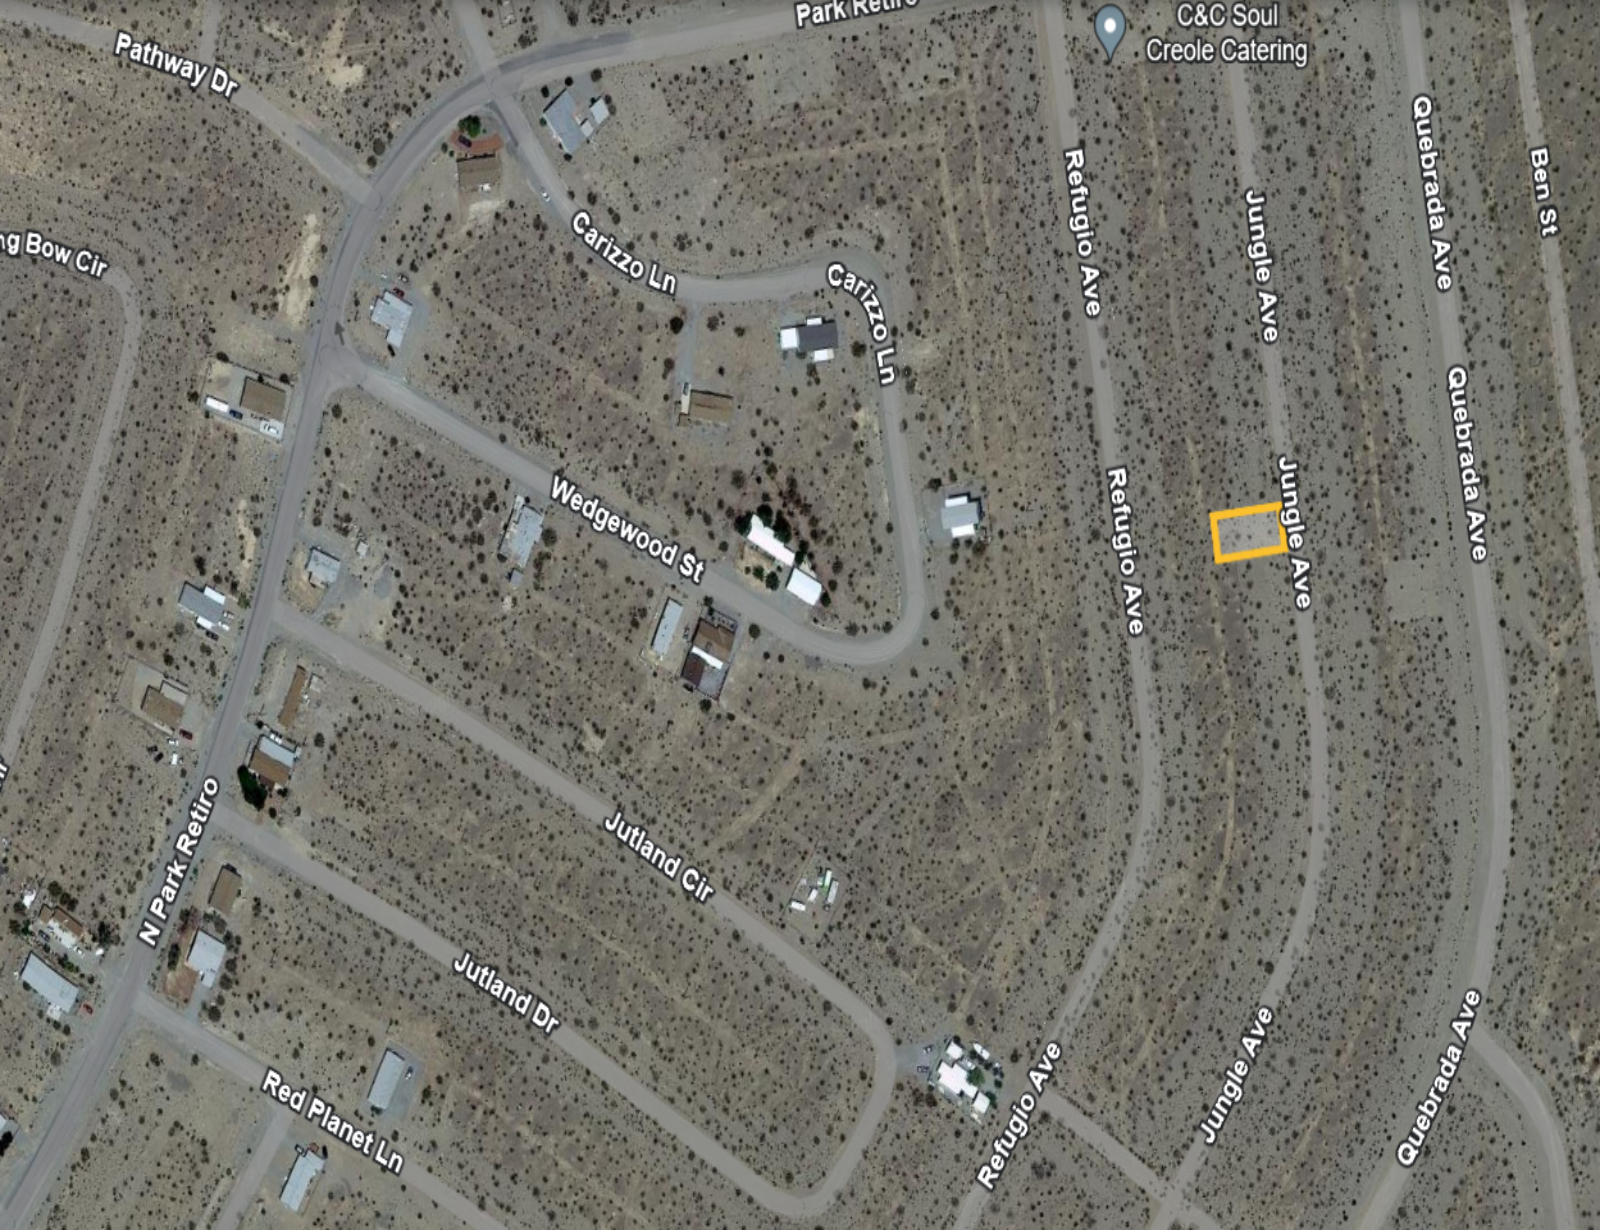 *NEW* NYE COUNTY, NEVADA RESIDENTIAL LOT NEAR HWY 160!! LOW MONTHLY PAYMENTS OF $135.00 6370 Jungle Ave., Pahrump, NV 89041 APN: 030-303-01 - Get Land Today